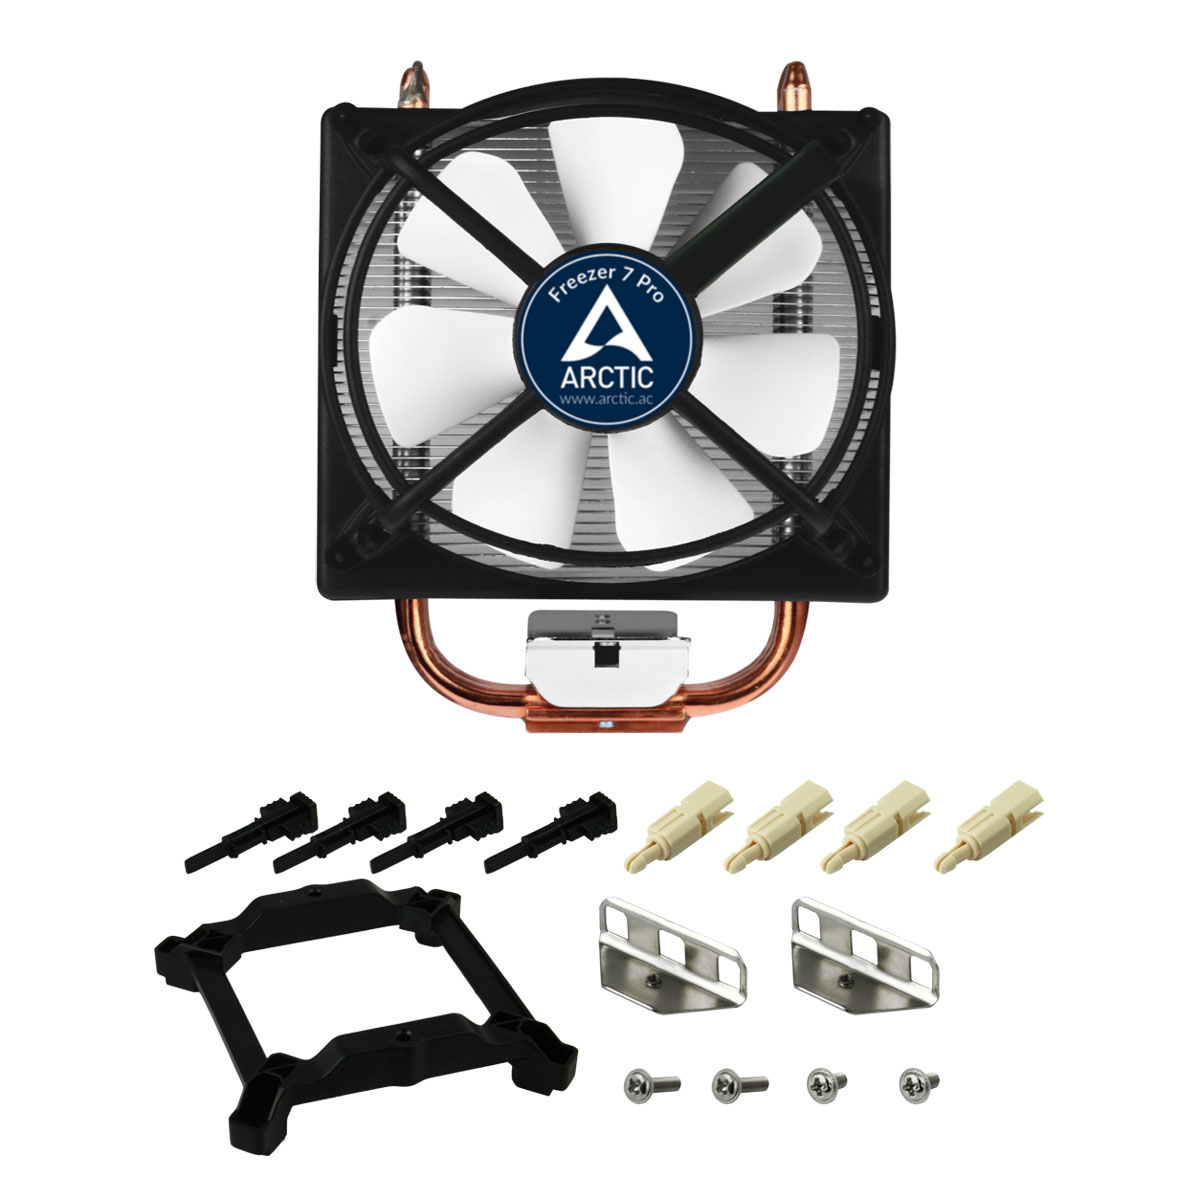 Clan Do my best eleven Freezer 7 Pro | Compact Multi-Compatible CPU Cooler | ARCTIC